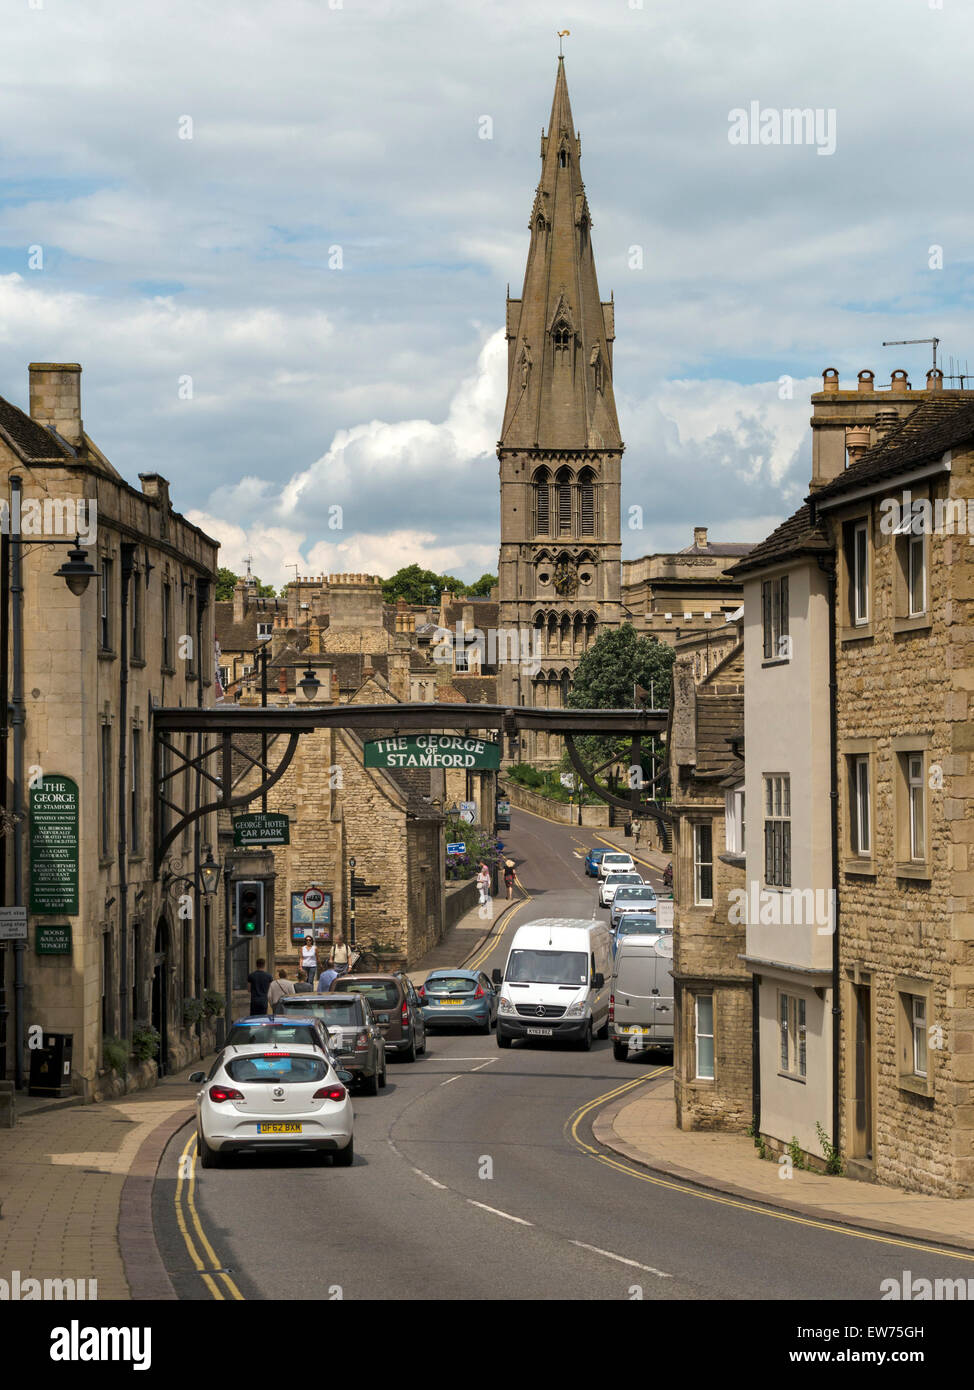 Stamford High Street St Martins with The George Hotel Arch and St Mary's Church, Stamford, Lincolnshire, England, UK. Stock Photo